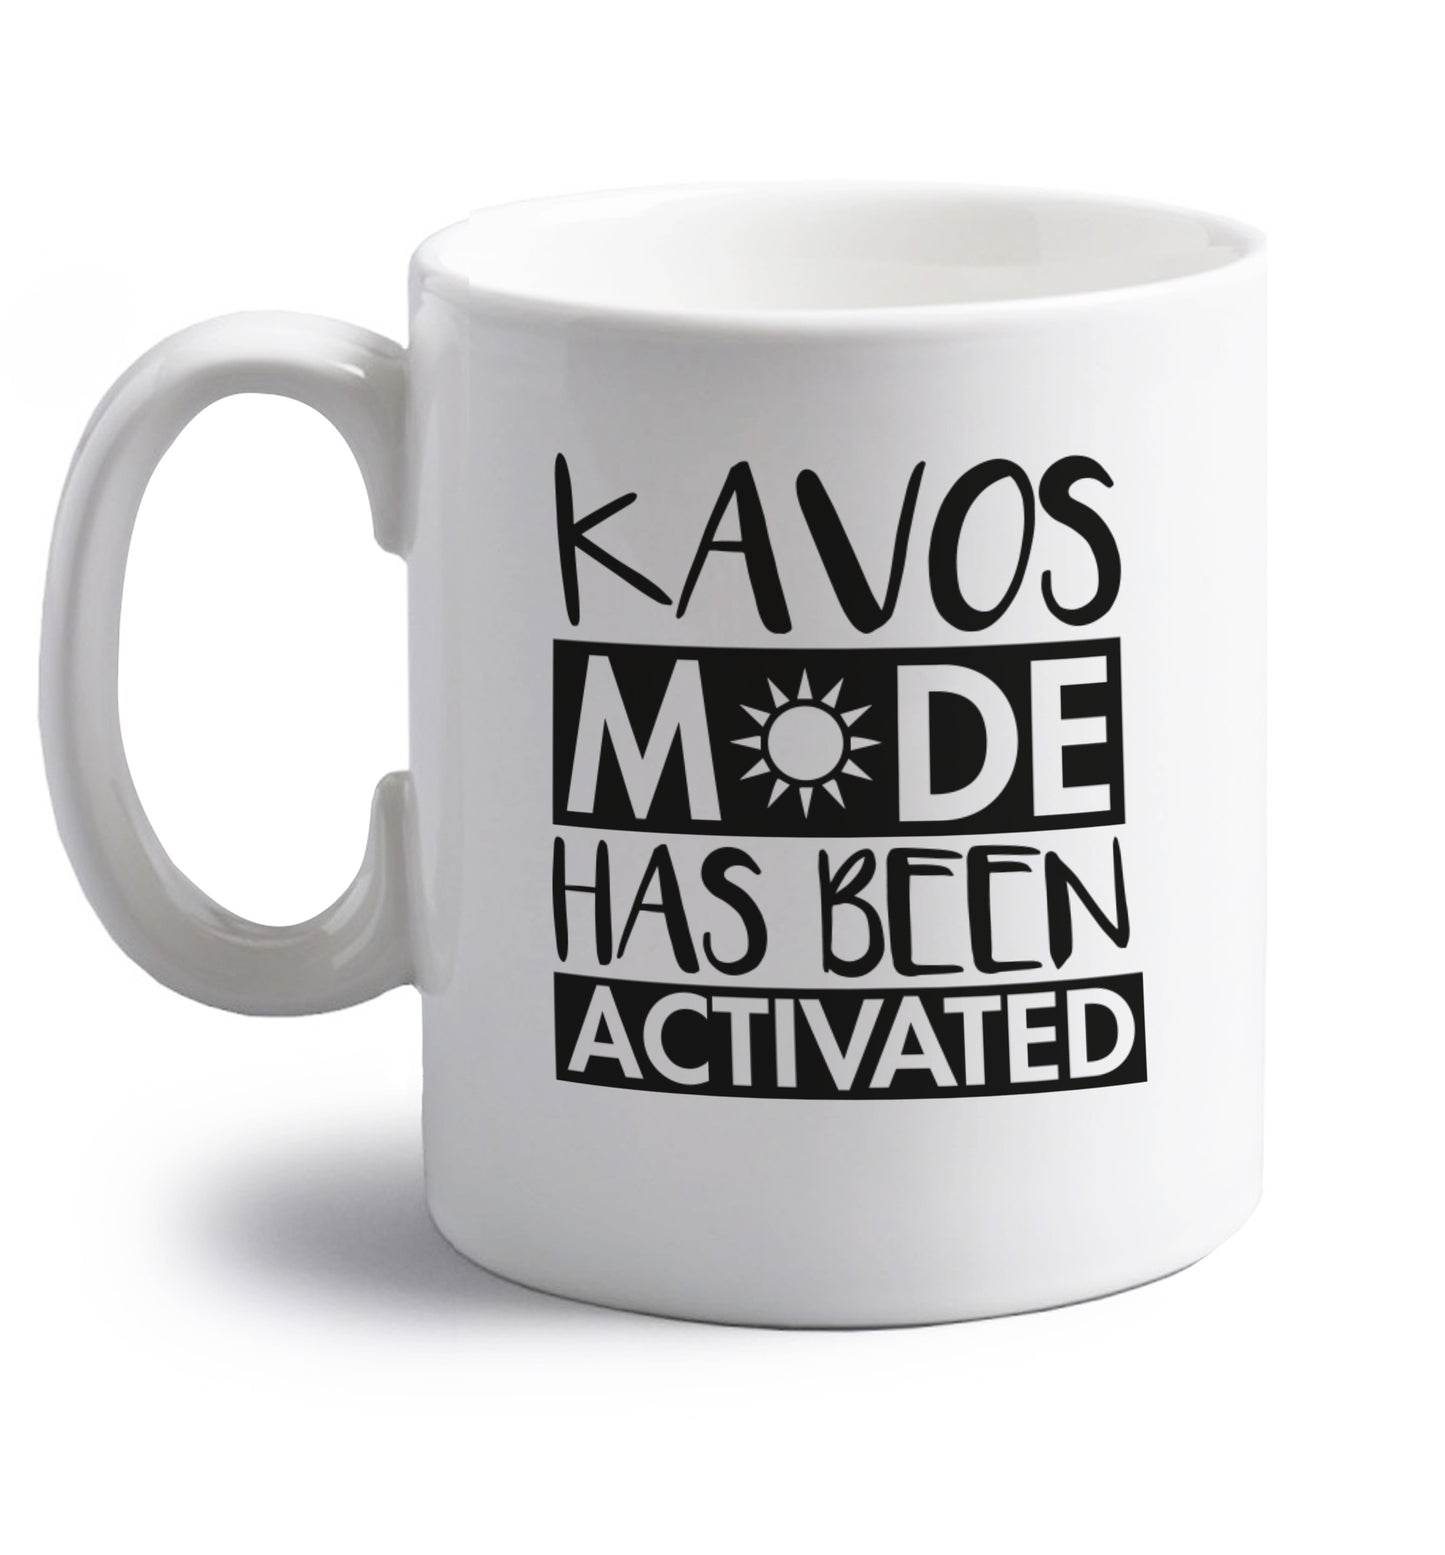 Kavos mode has been activated right handed white ceramic mug 